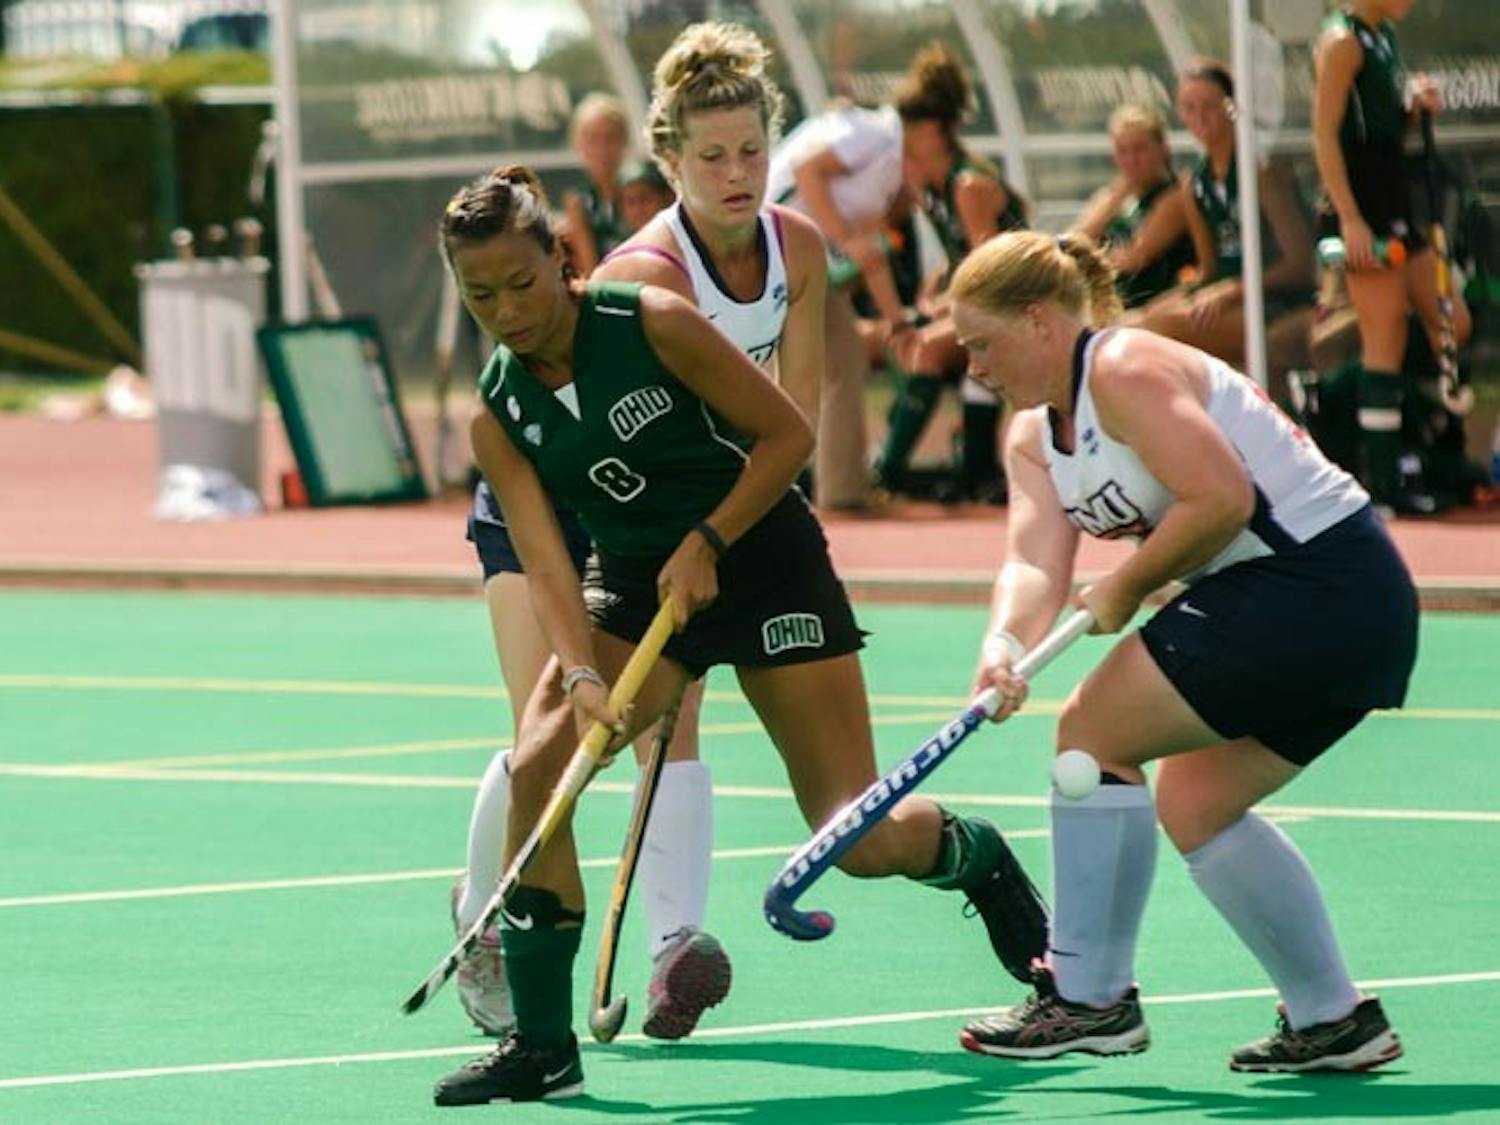 Field Hockey: Ohio outplays Colonials, fails to capitalize on opportunities  